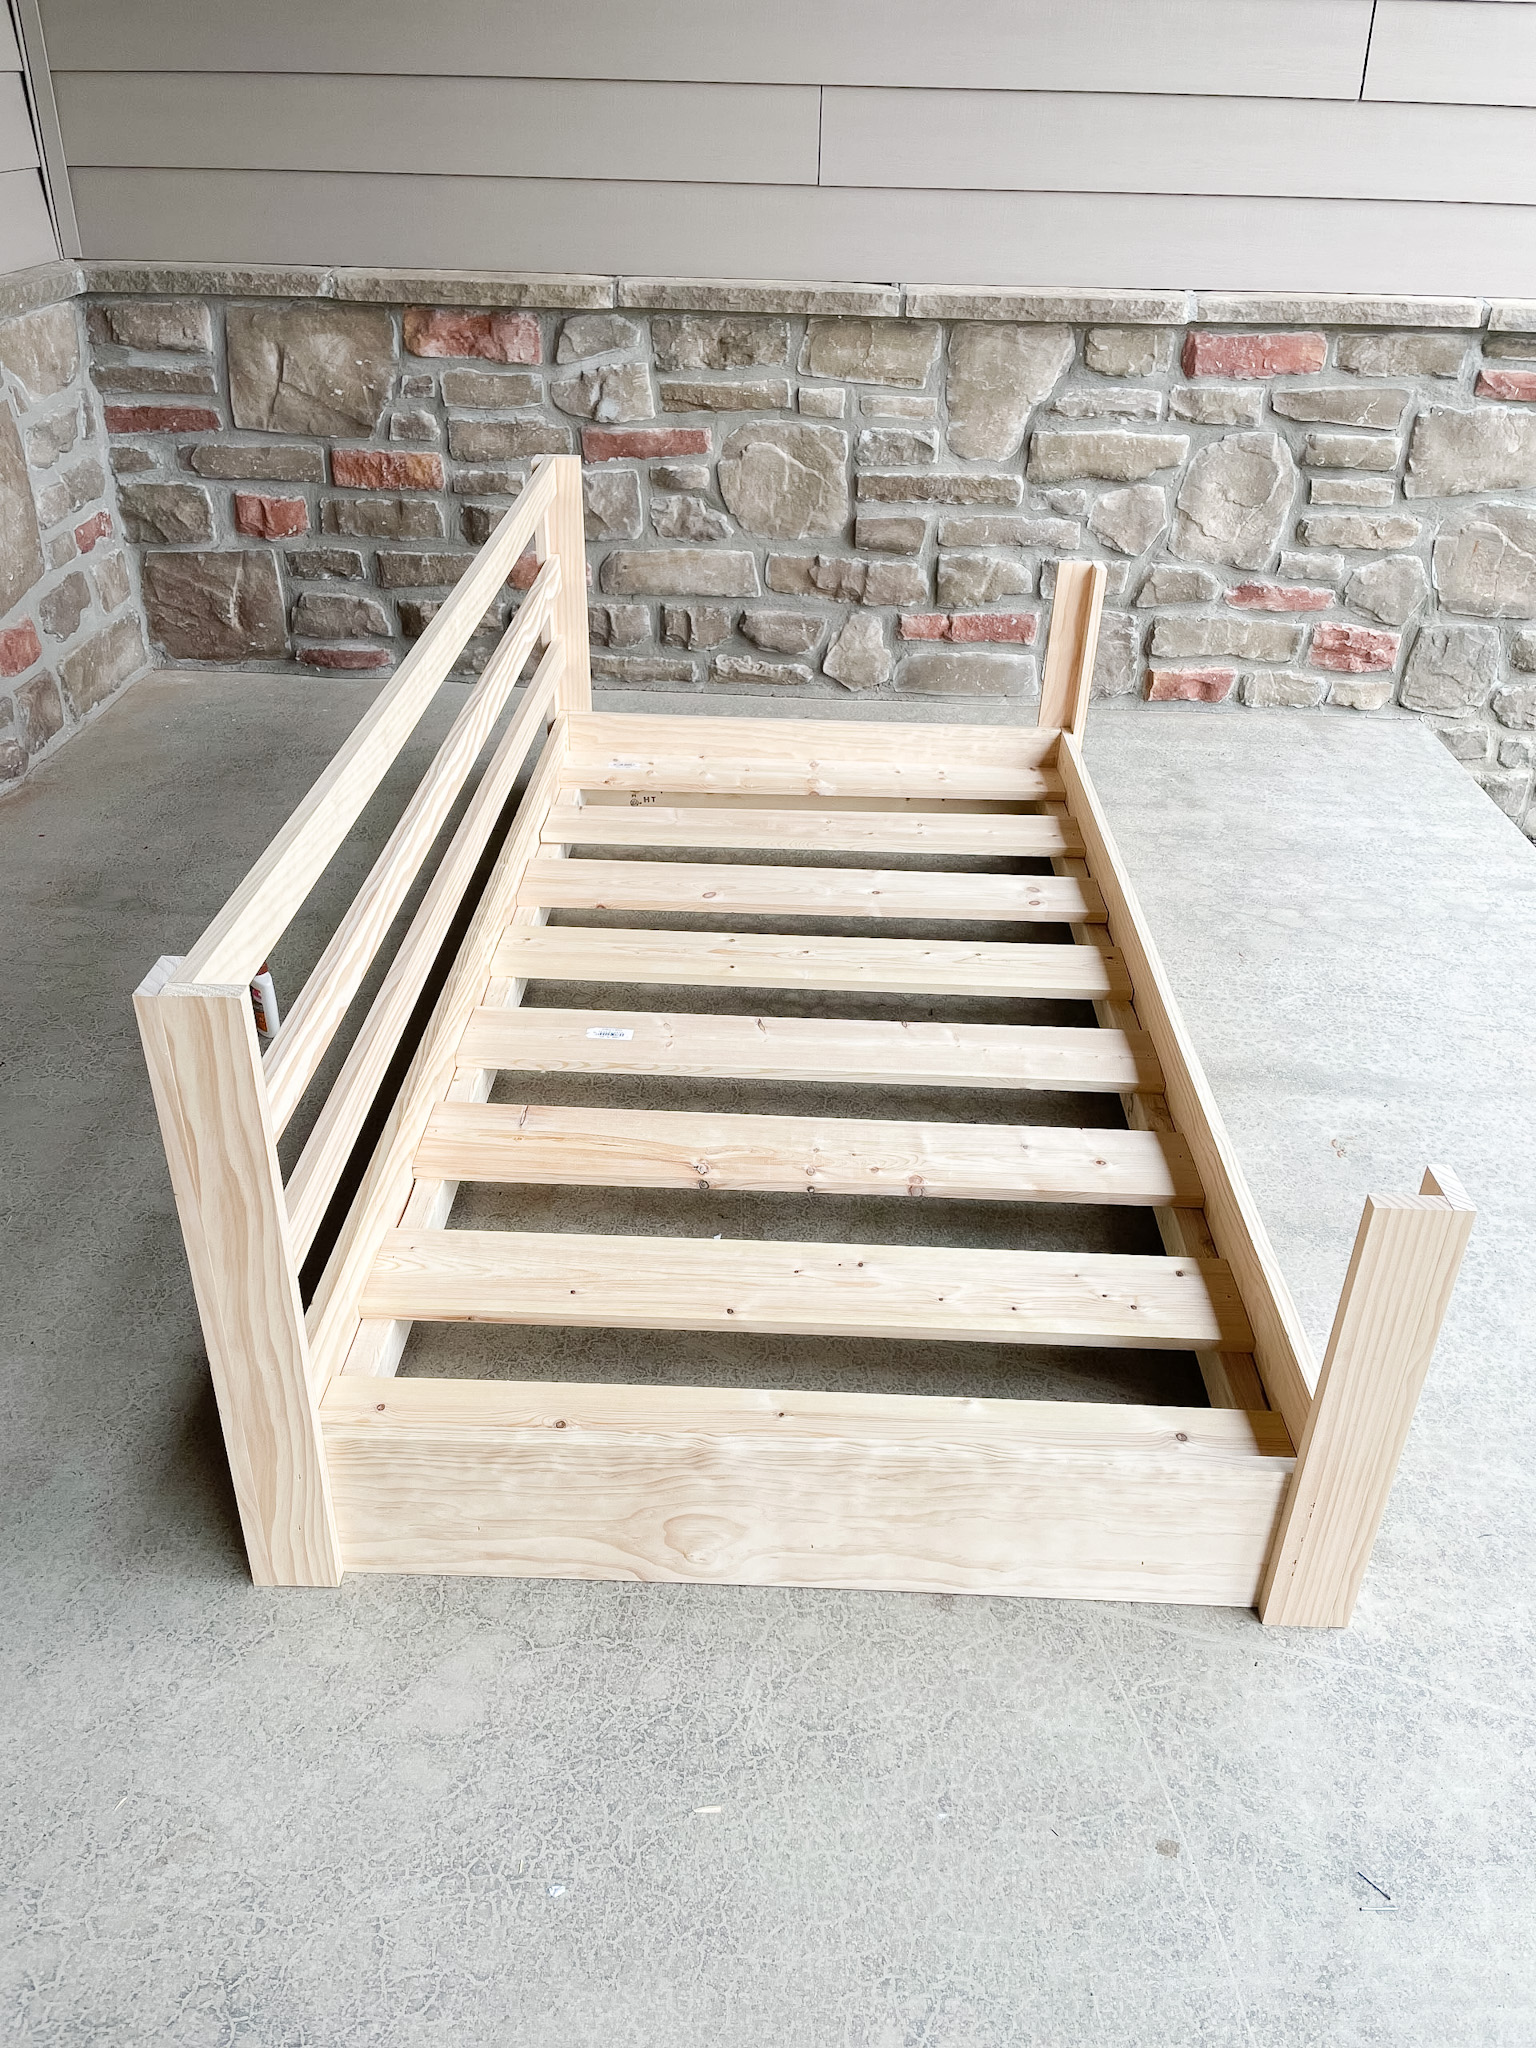 unfinished porch swing bed